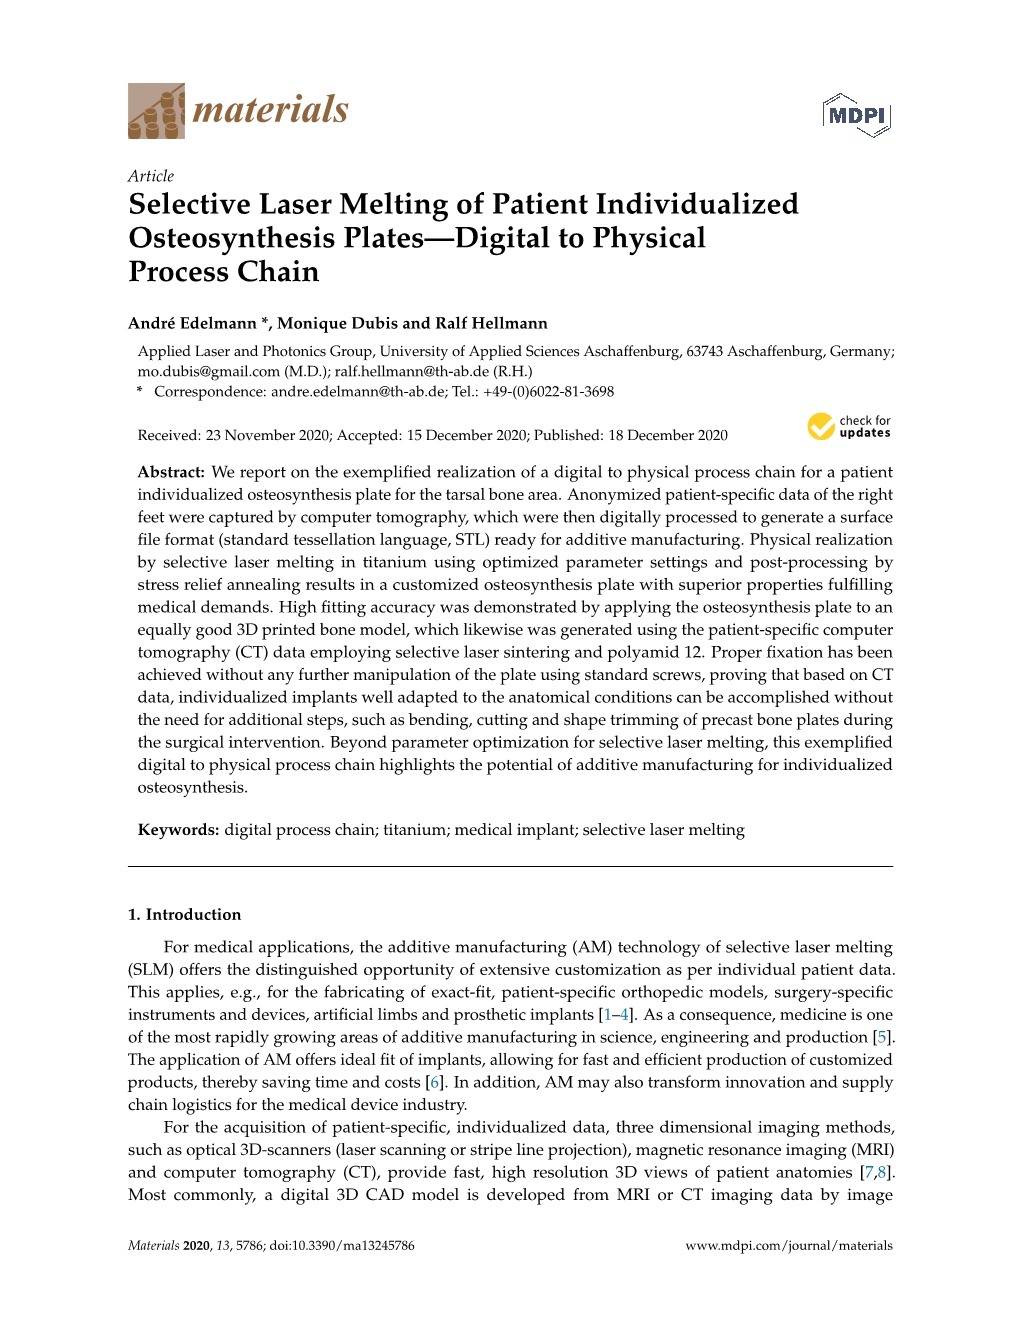 Selective Laser Melting of Patient Individualized Osteosynthesis Plates—Digital to Physical Process Chain